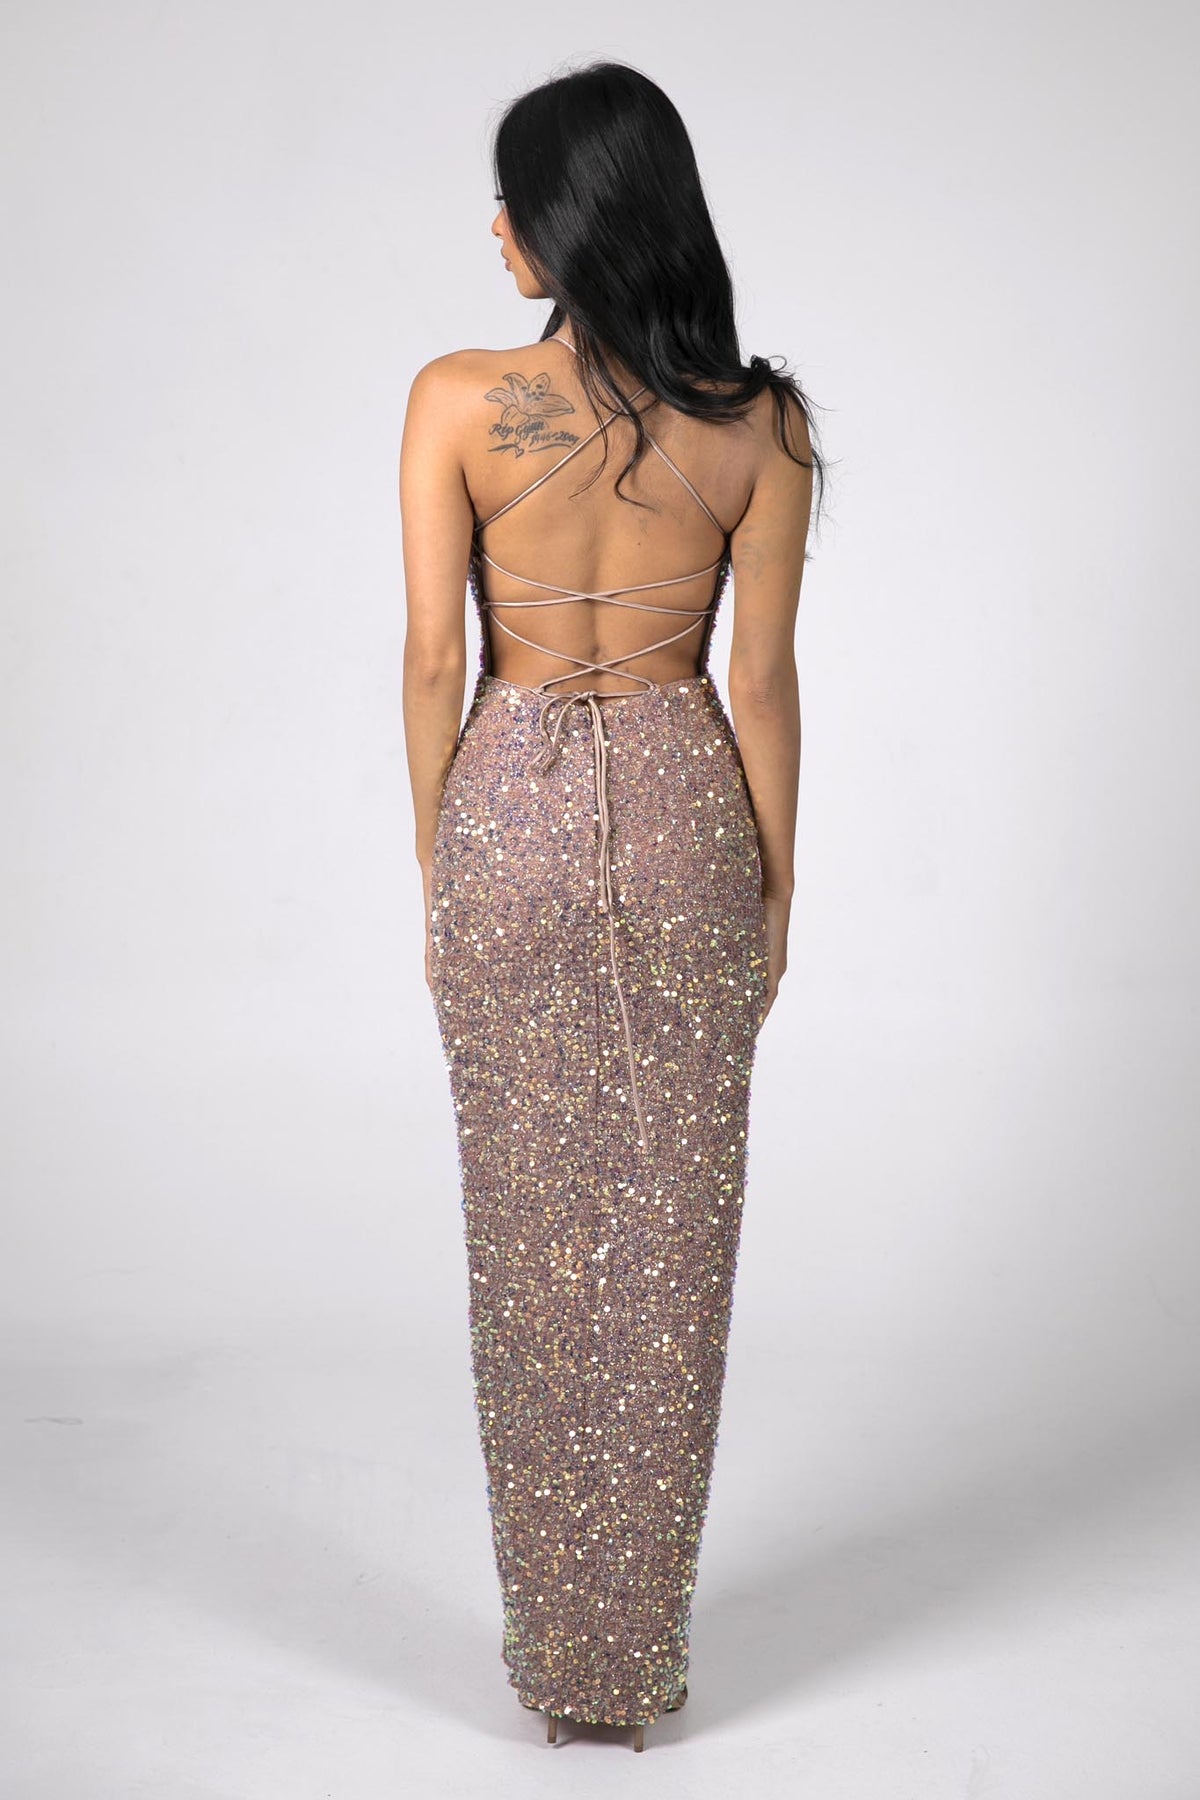 Lace Up Open Back of Dusty Rose Gold Sequin Maxi Evening Dress with Cowl Neckline and Side Split